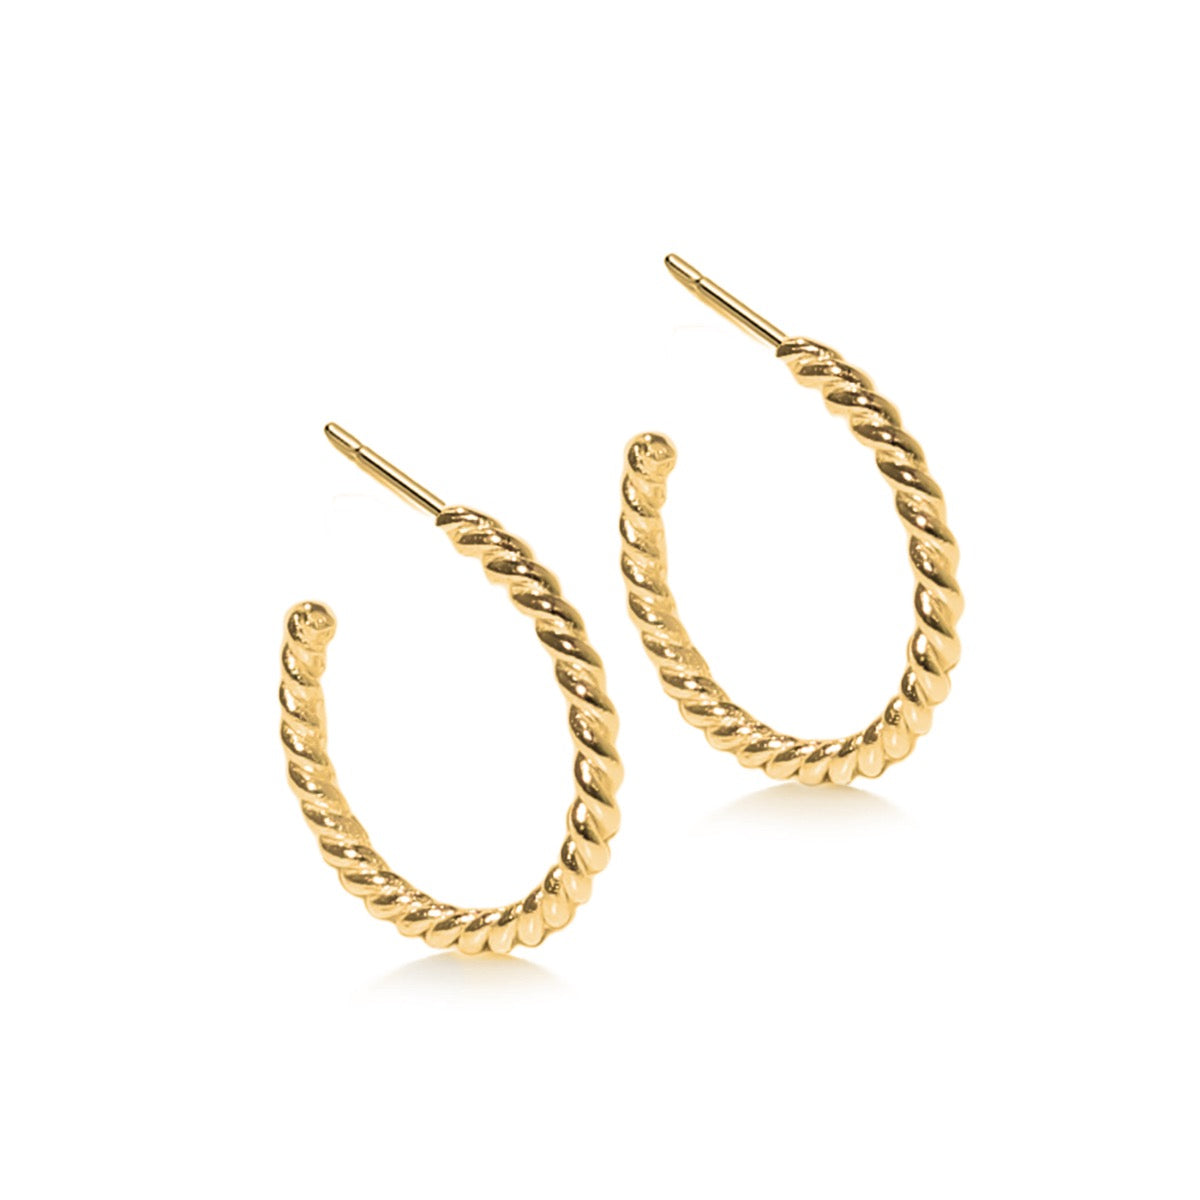 Gold Plated Twisted Hoop Earrings | Hersey & Son Silversmiths